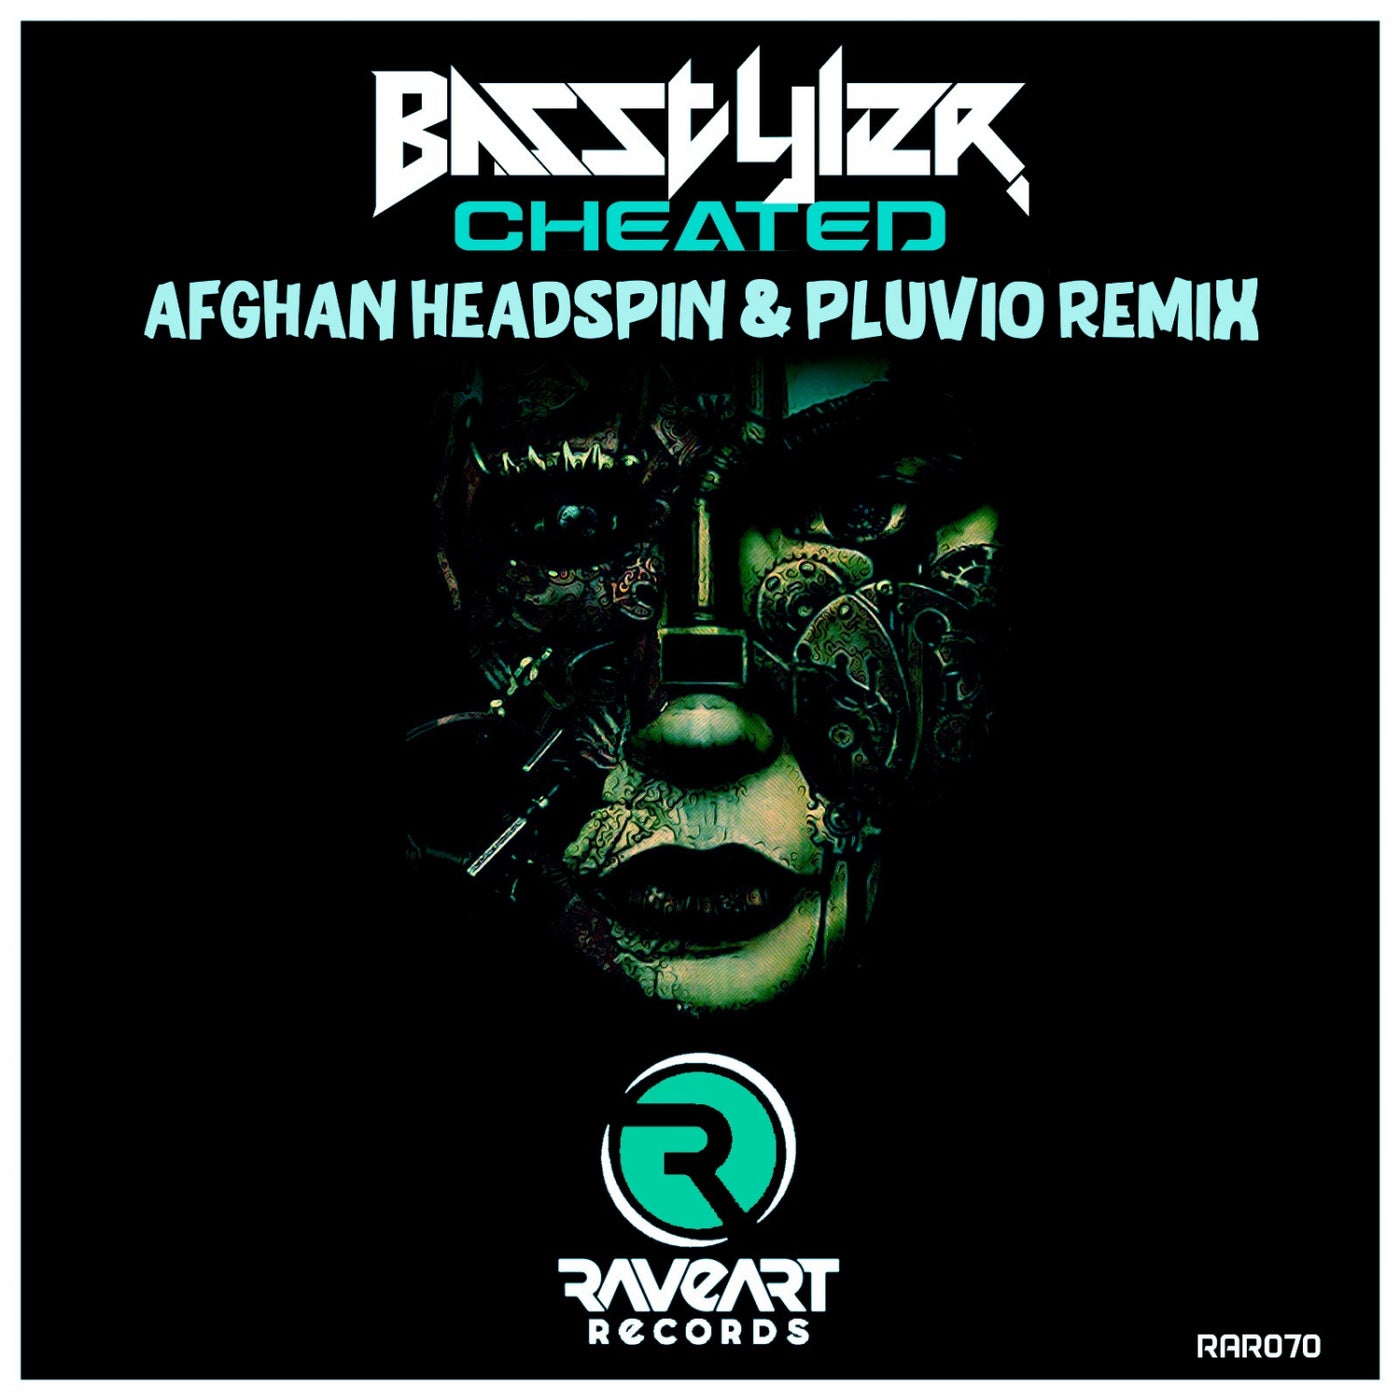 Cheated (Afghan Headspin & Pluvio Remix)